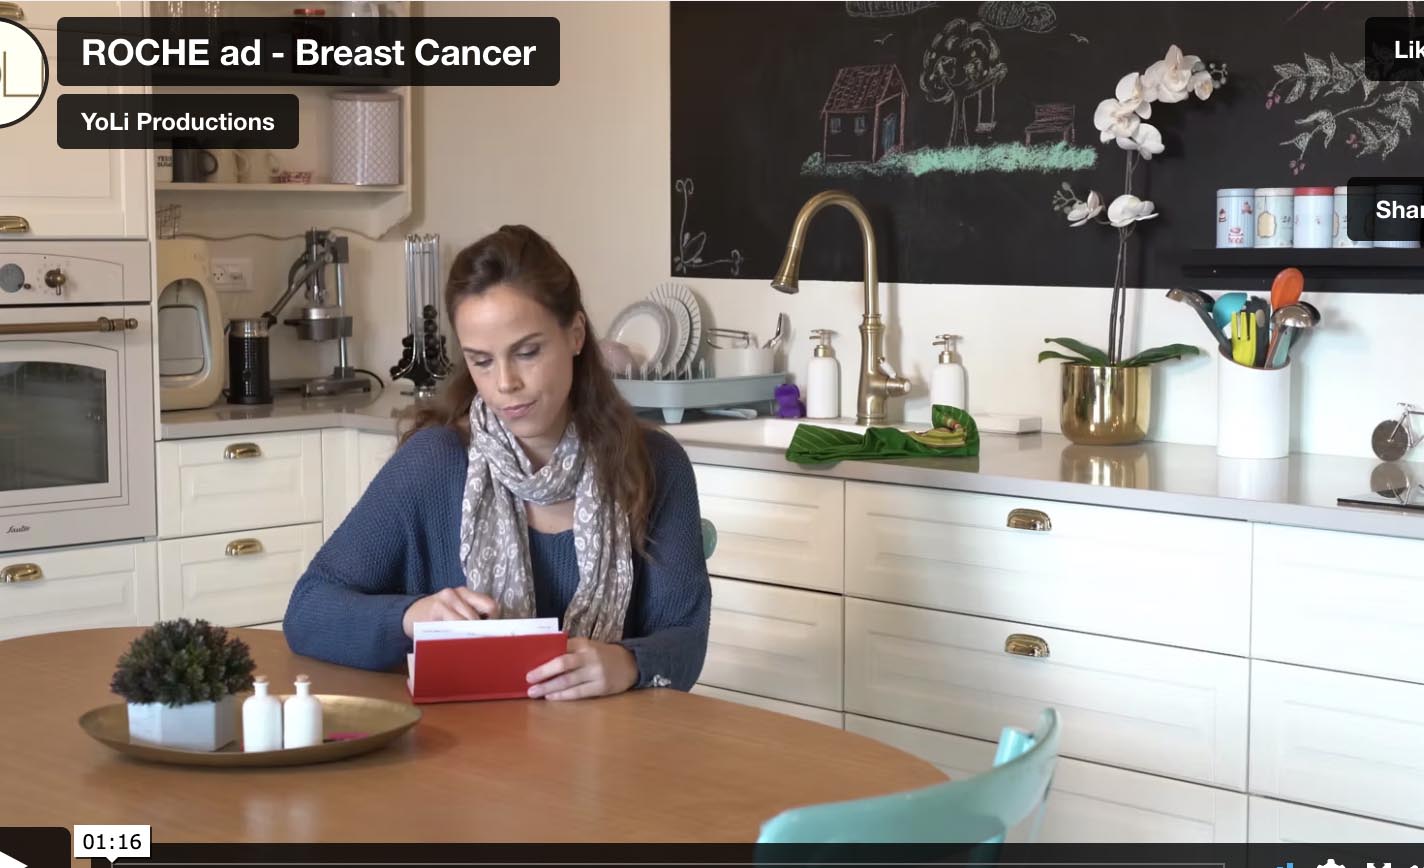 Online advertisment - Tripple Negative breast cancerProduced and Directed by YoLi Productions